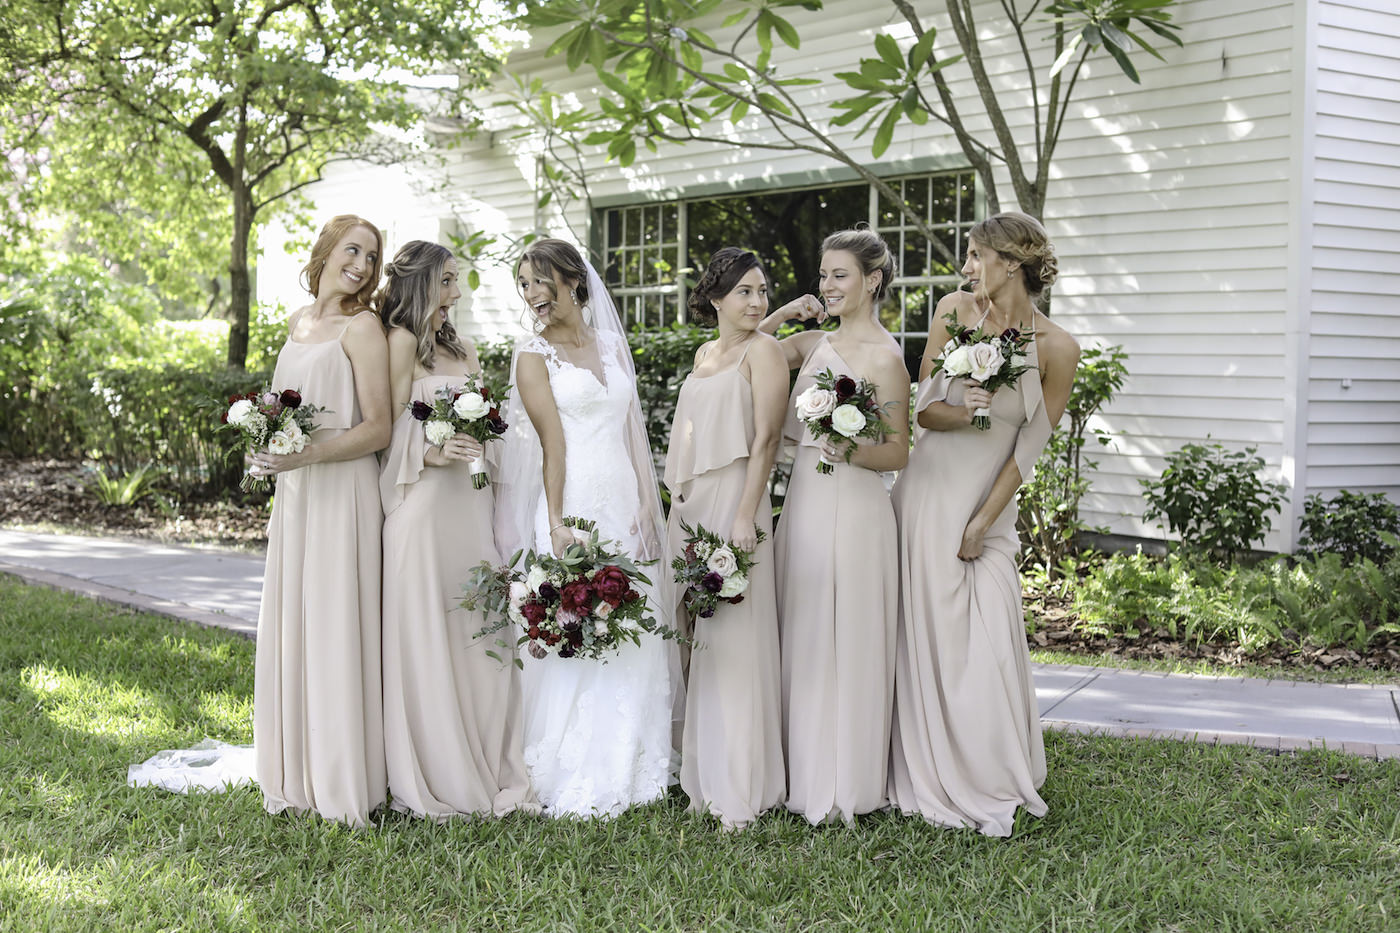 Bride in Lace Wedding Dress with Bridesmaids in Neutral Nude Dresses Holding Burgundy, Blush Pink and Ivory Roses with Greenery Floral Bouquet | Wedding Photographer Lifelong Photography Studio | Tampa Bay Wedding Planner Blue Skies Weddings and Events | Dress Shop Bella Bridesmaids